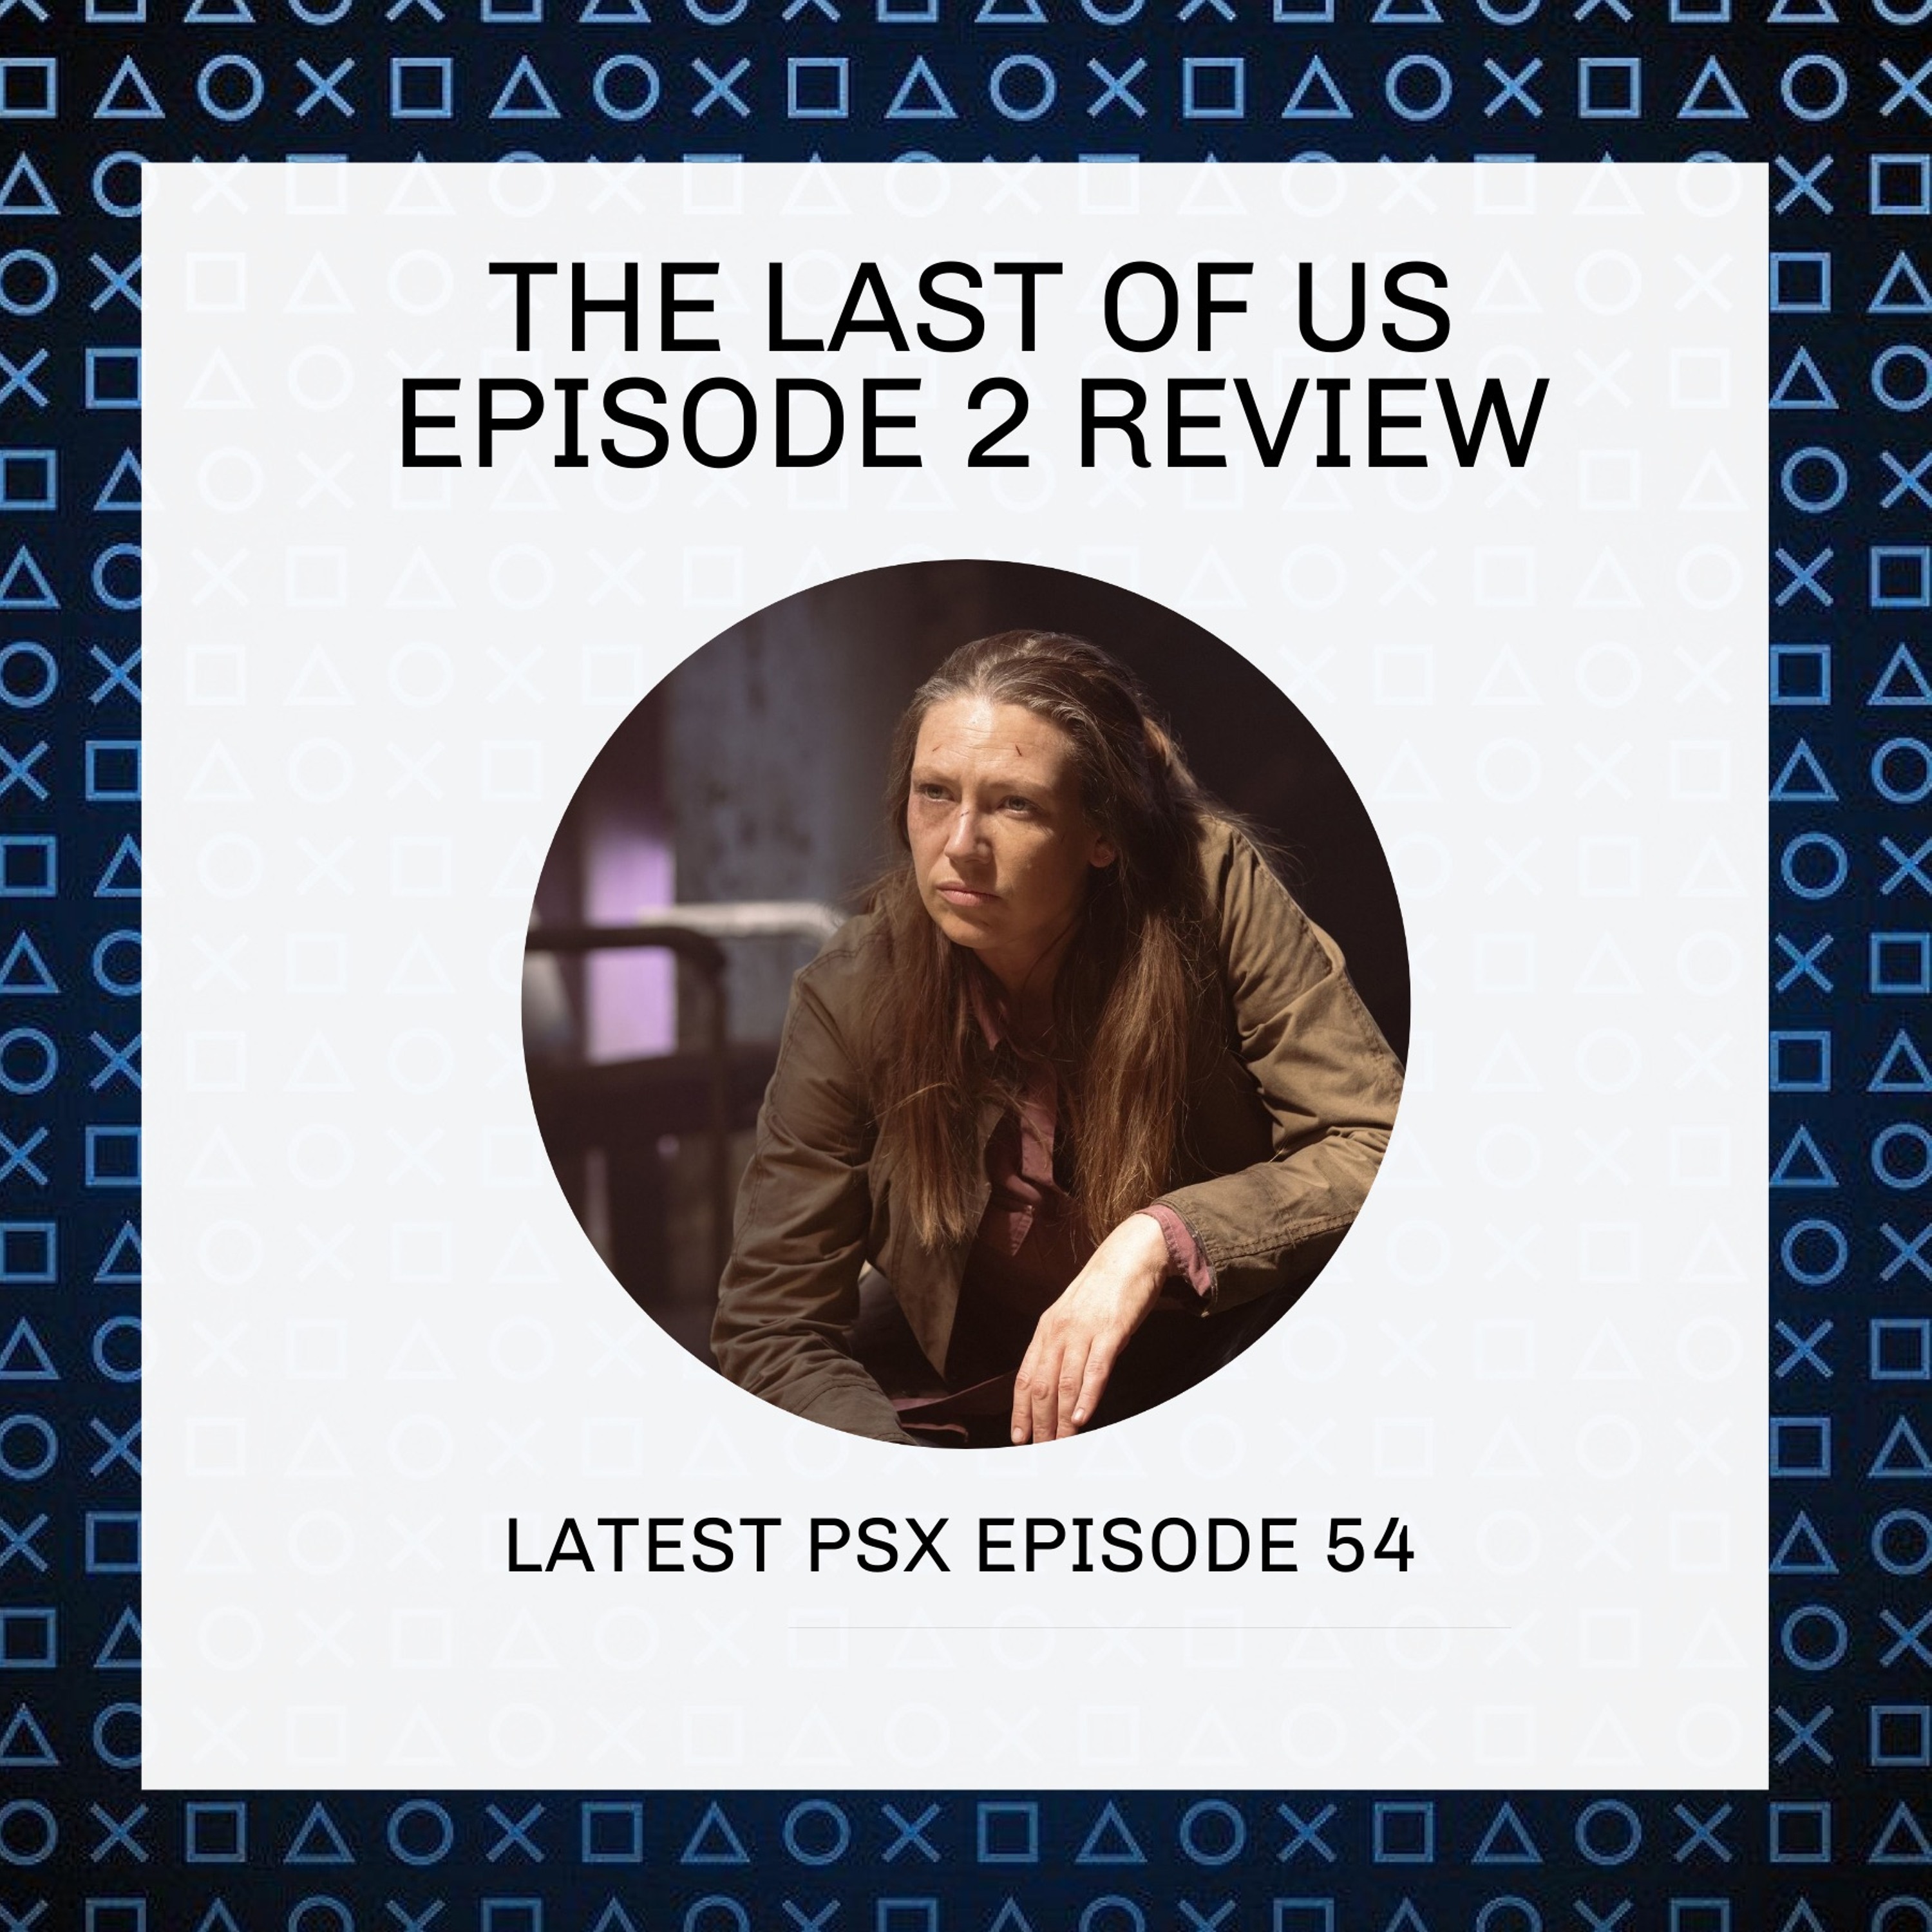 FREE EPISODE - The Last Of Us Episode 2 Review - Latest PSX Episode 54